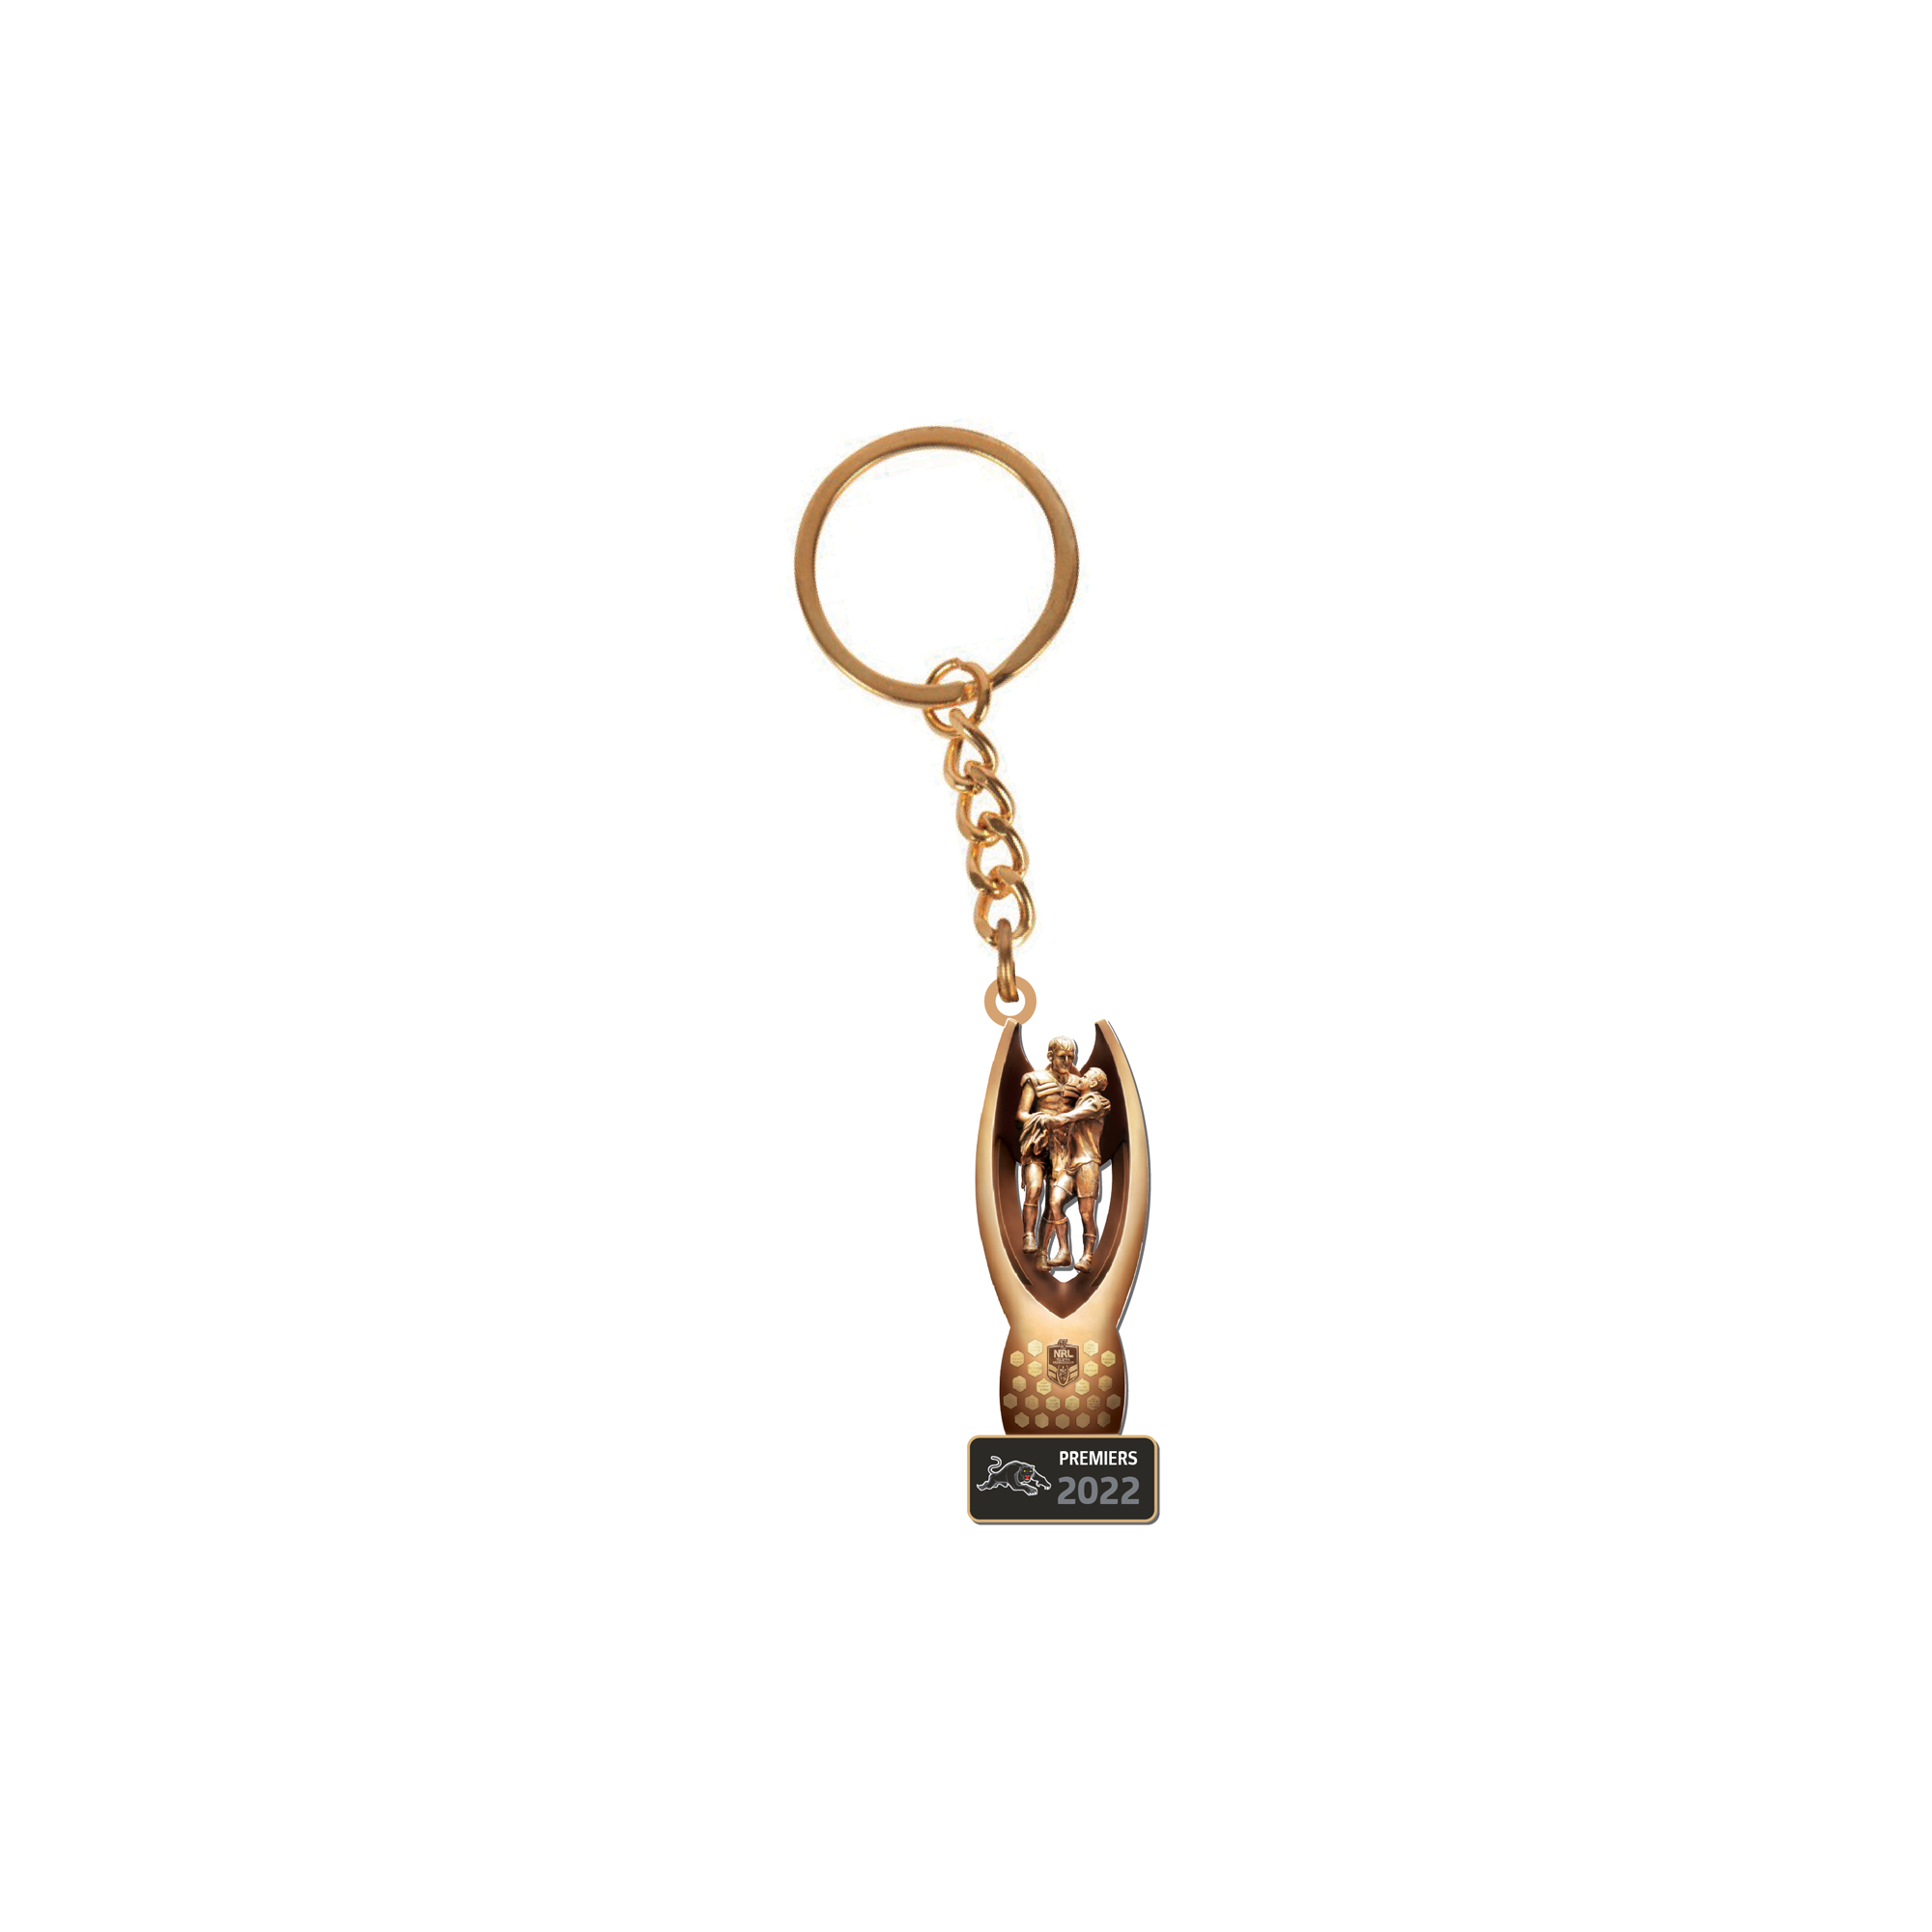 Penrith Panthers 2022 Premiers NRL Trophy Keyring (Due early November)